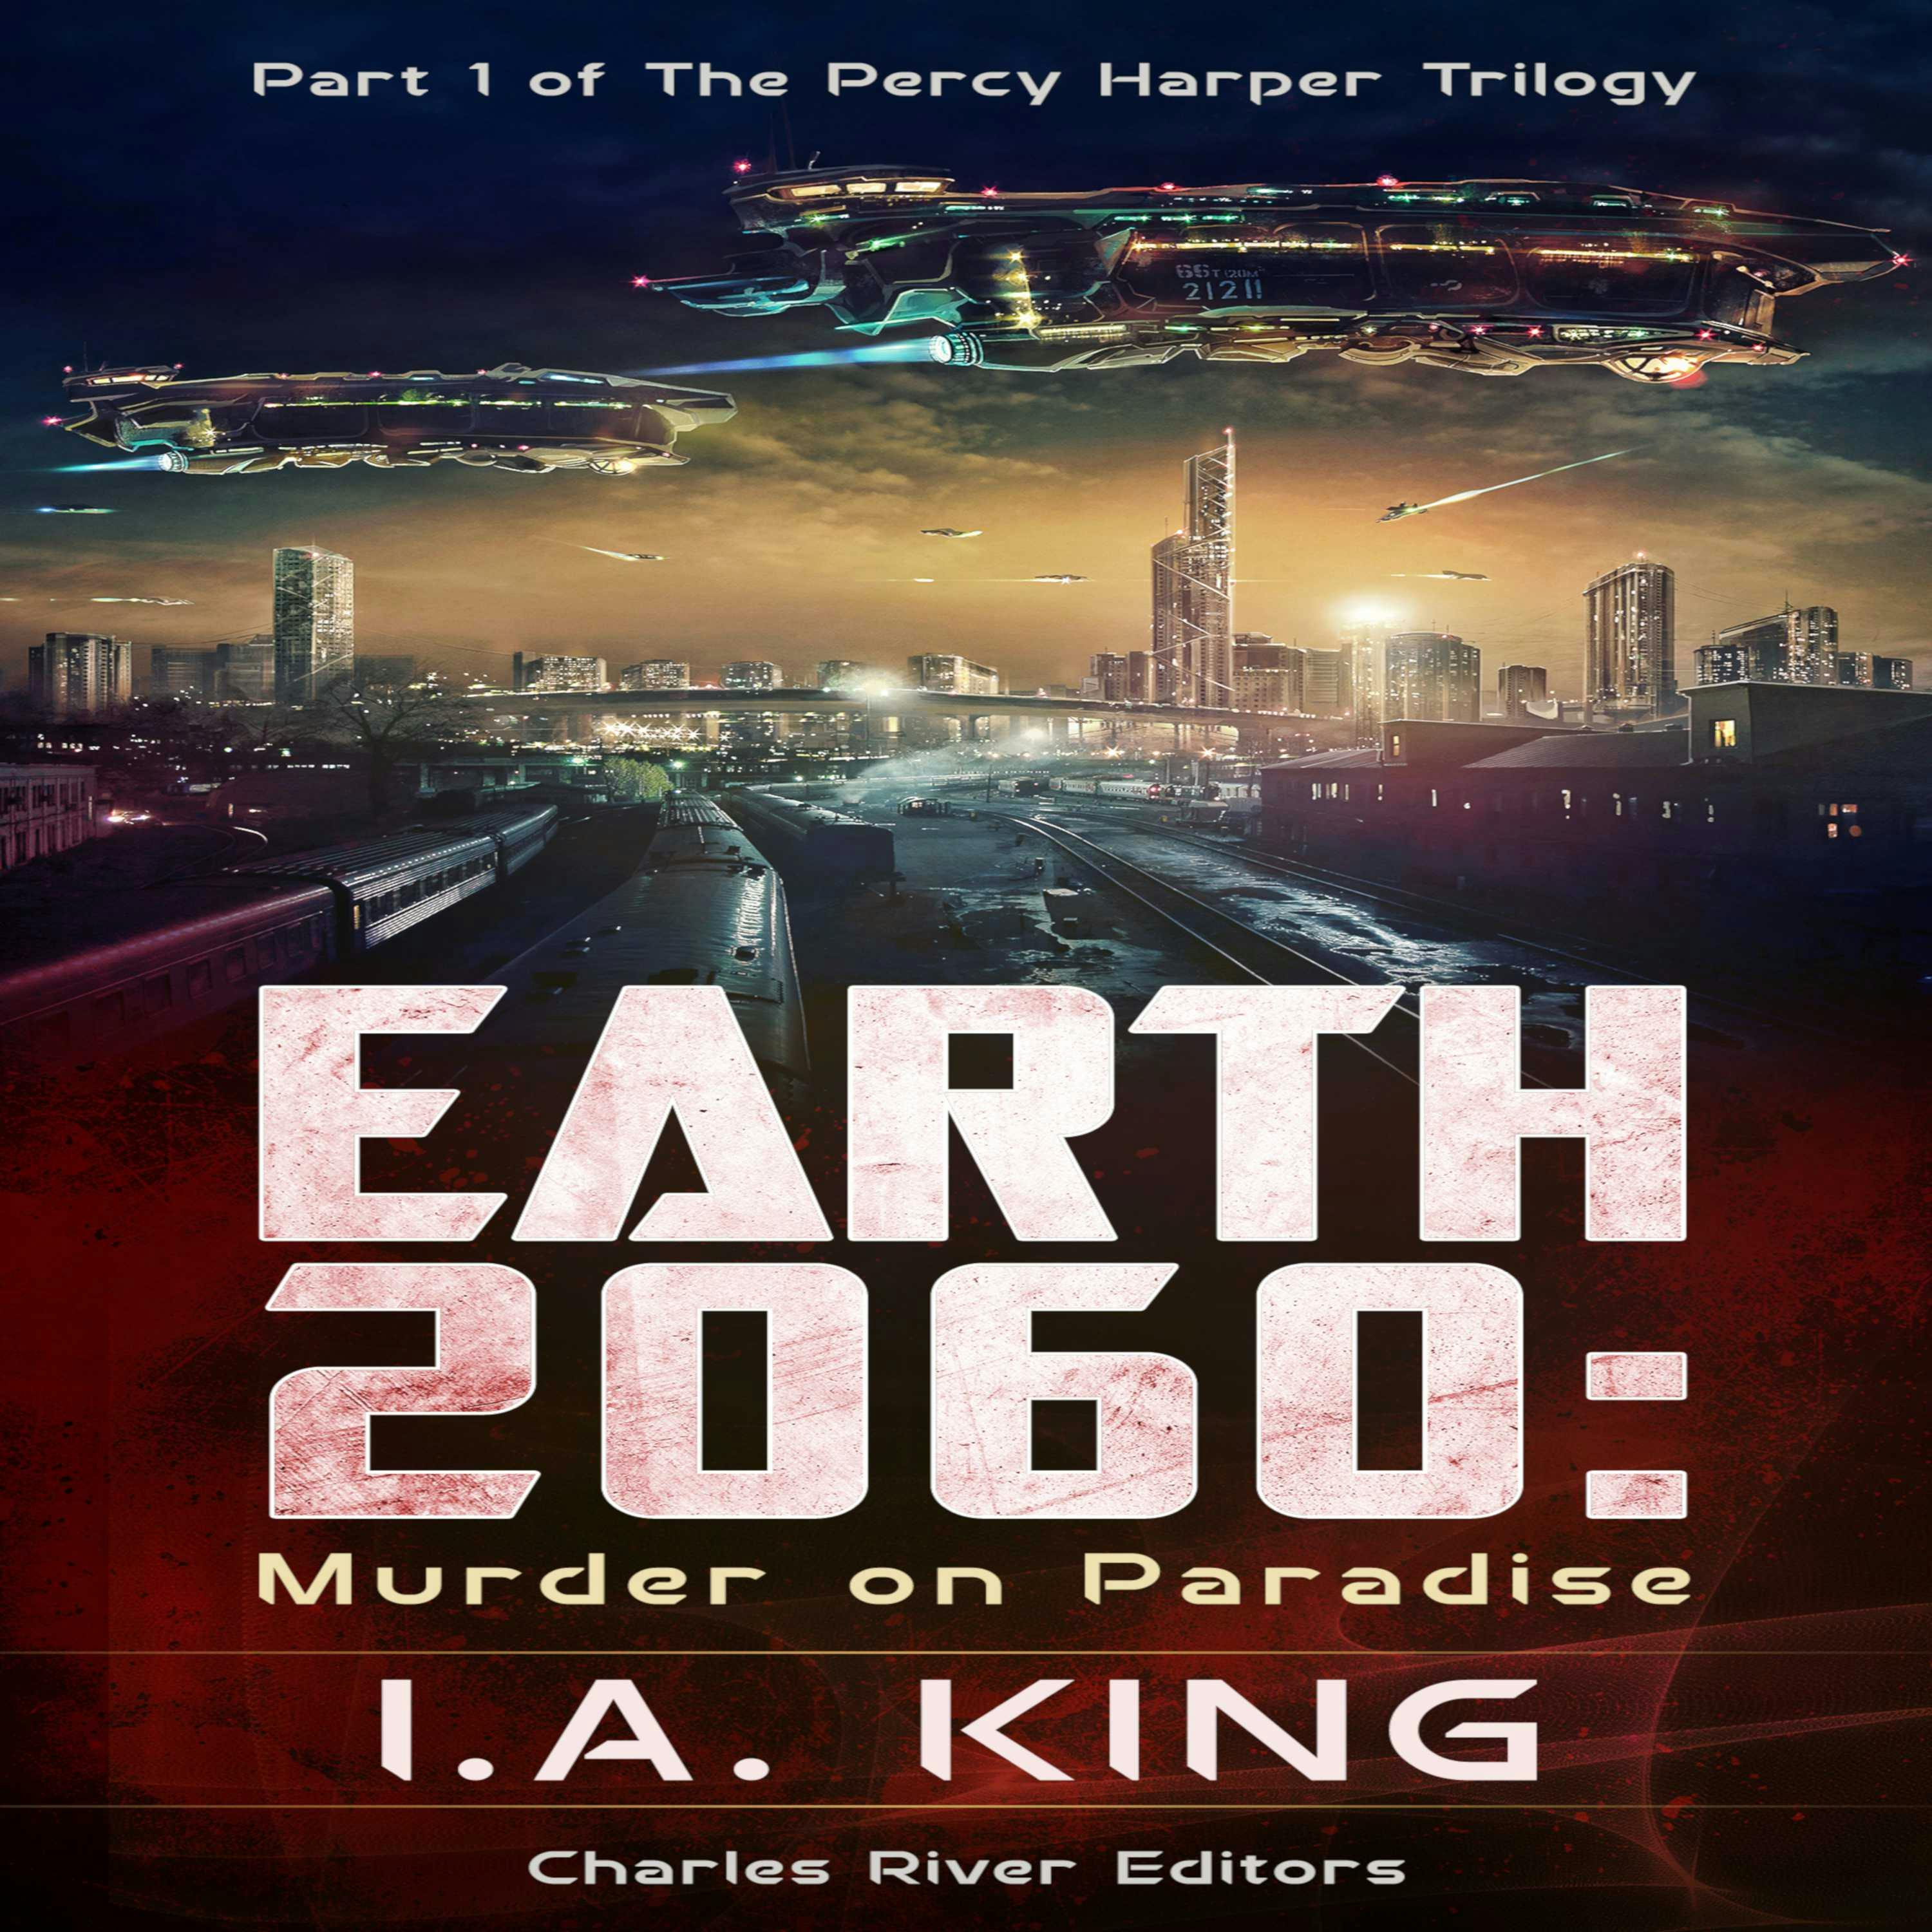 Earth 2060: Murder on Paradise (Part 1 of The Percy Harper Trilogy) - I.A. King, Charles River Editors